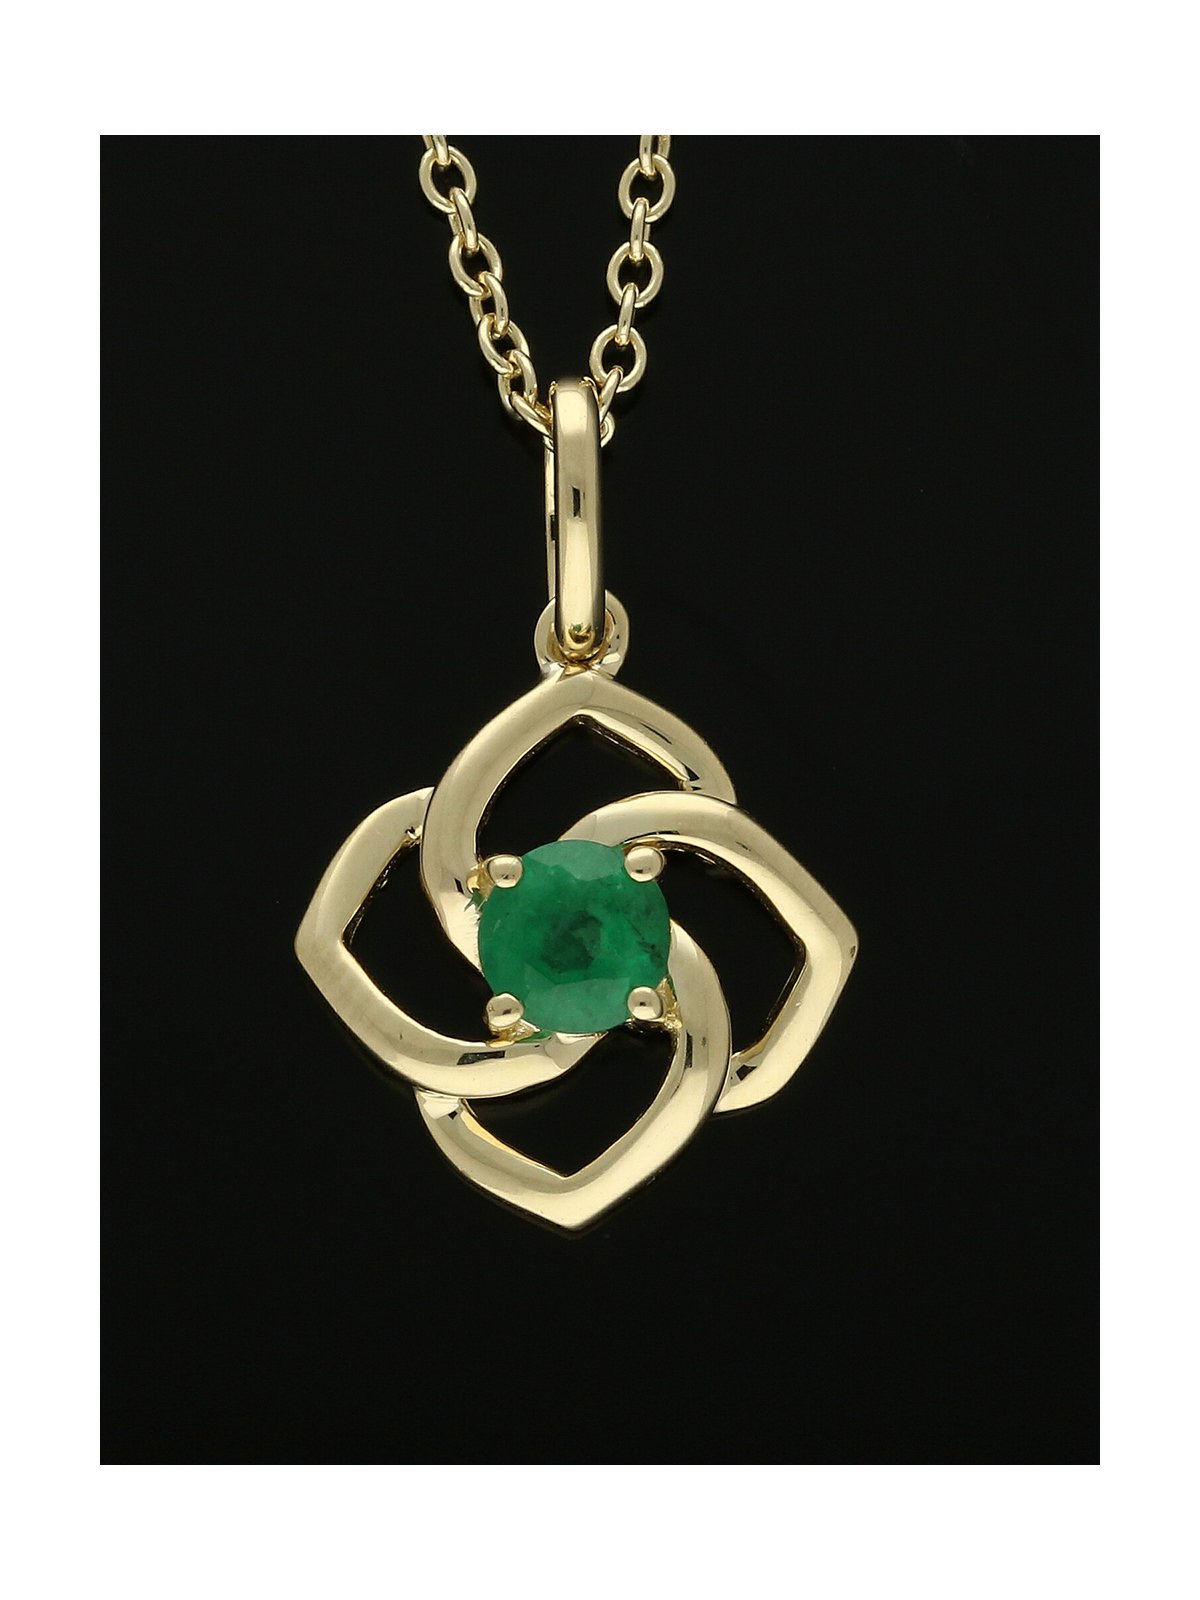 Emerald Floral Twist Pendant Necklace in 9ct Yellow Gold